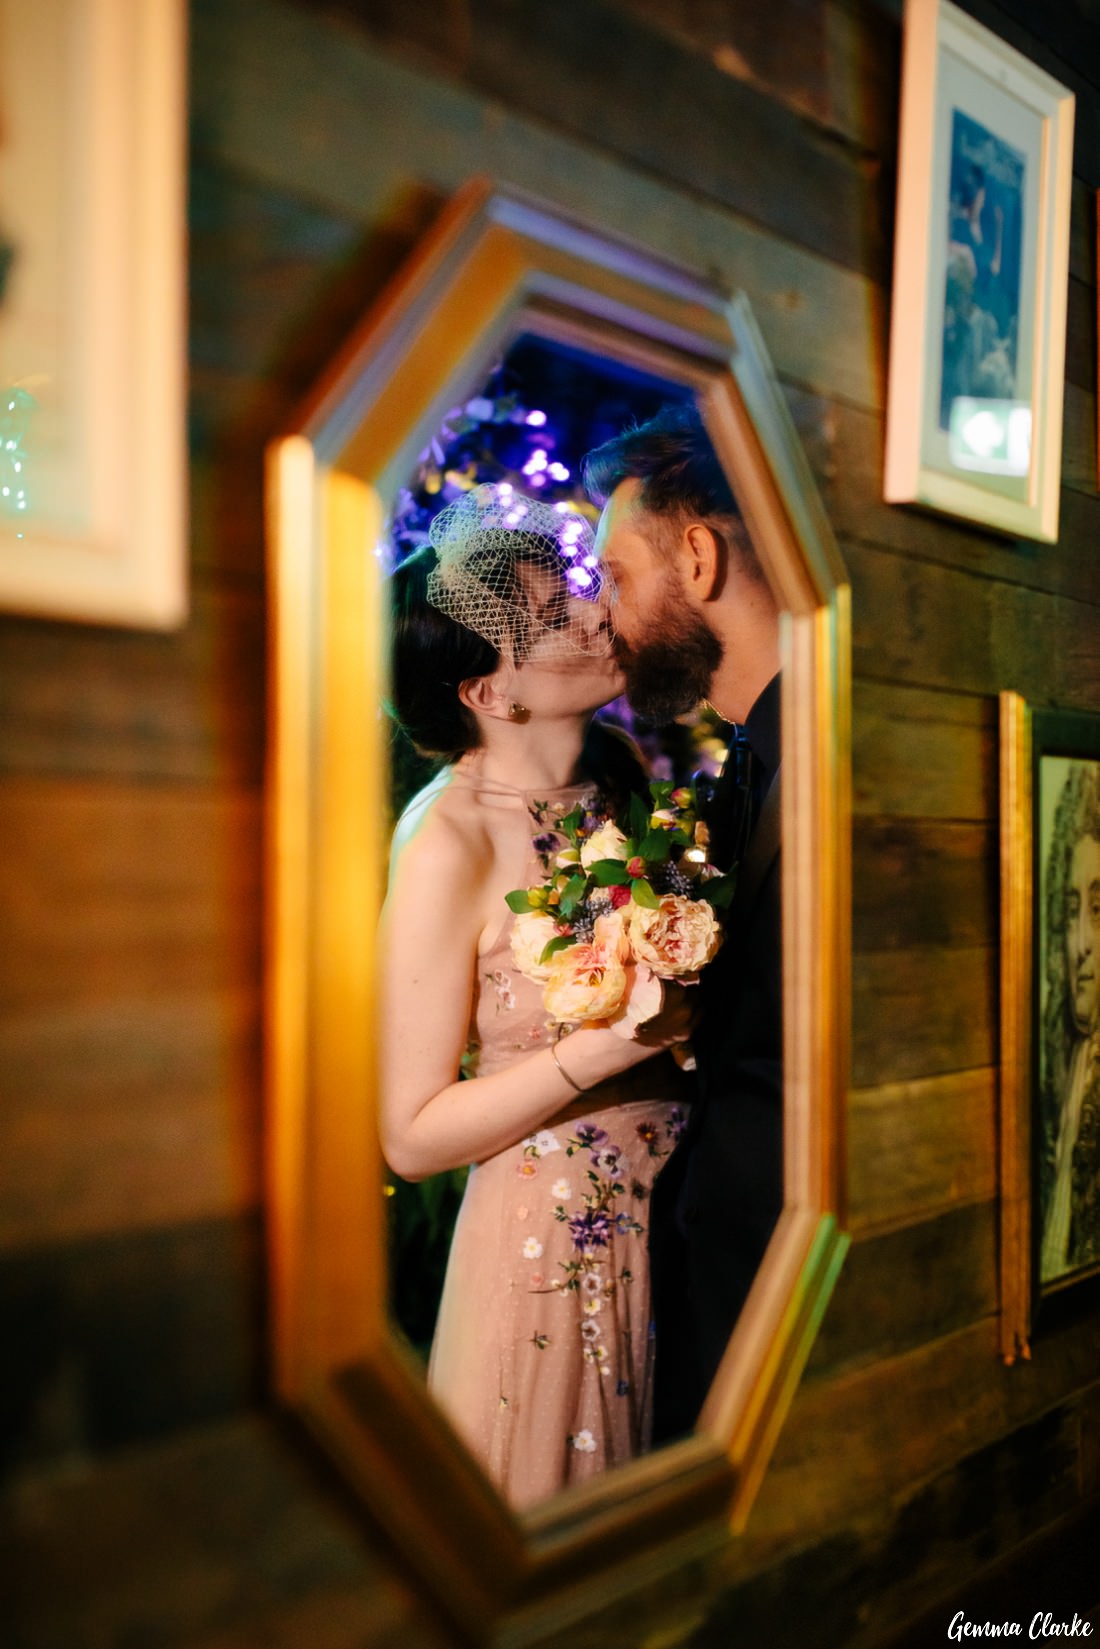 The happy couple kissing and framed with the mirror at this rooftop bar wedding